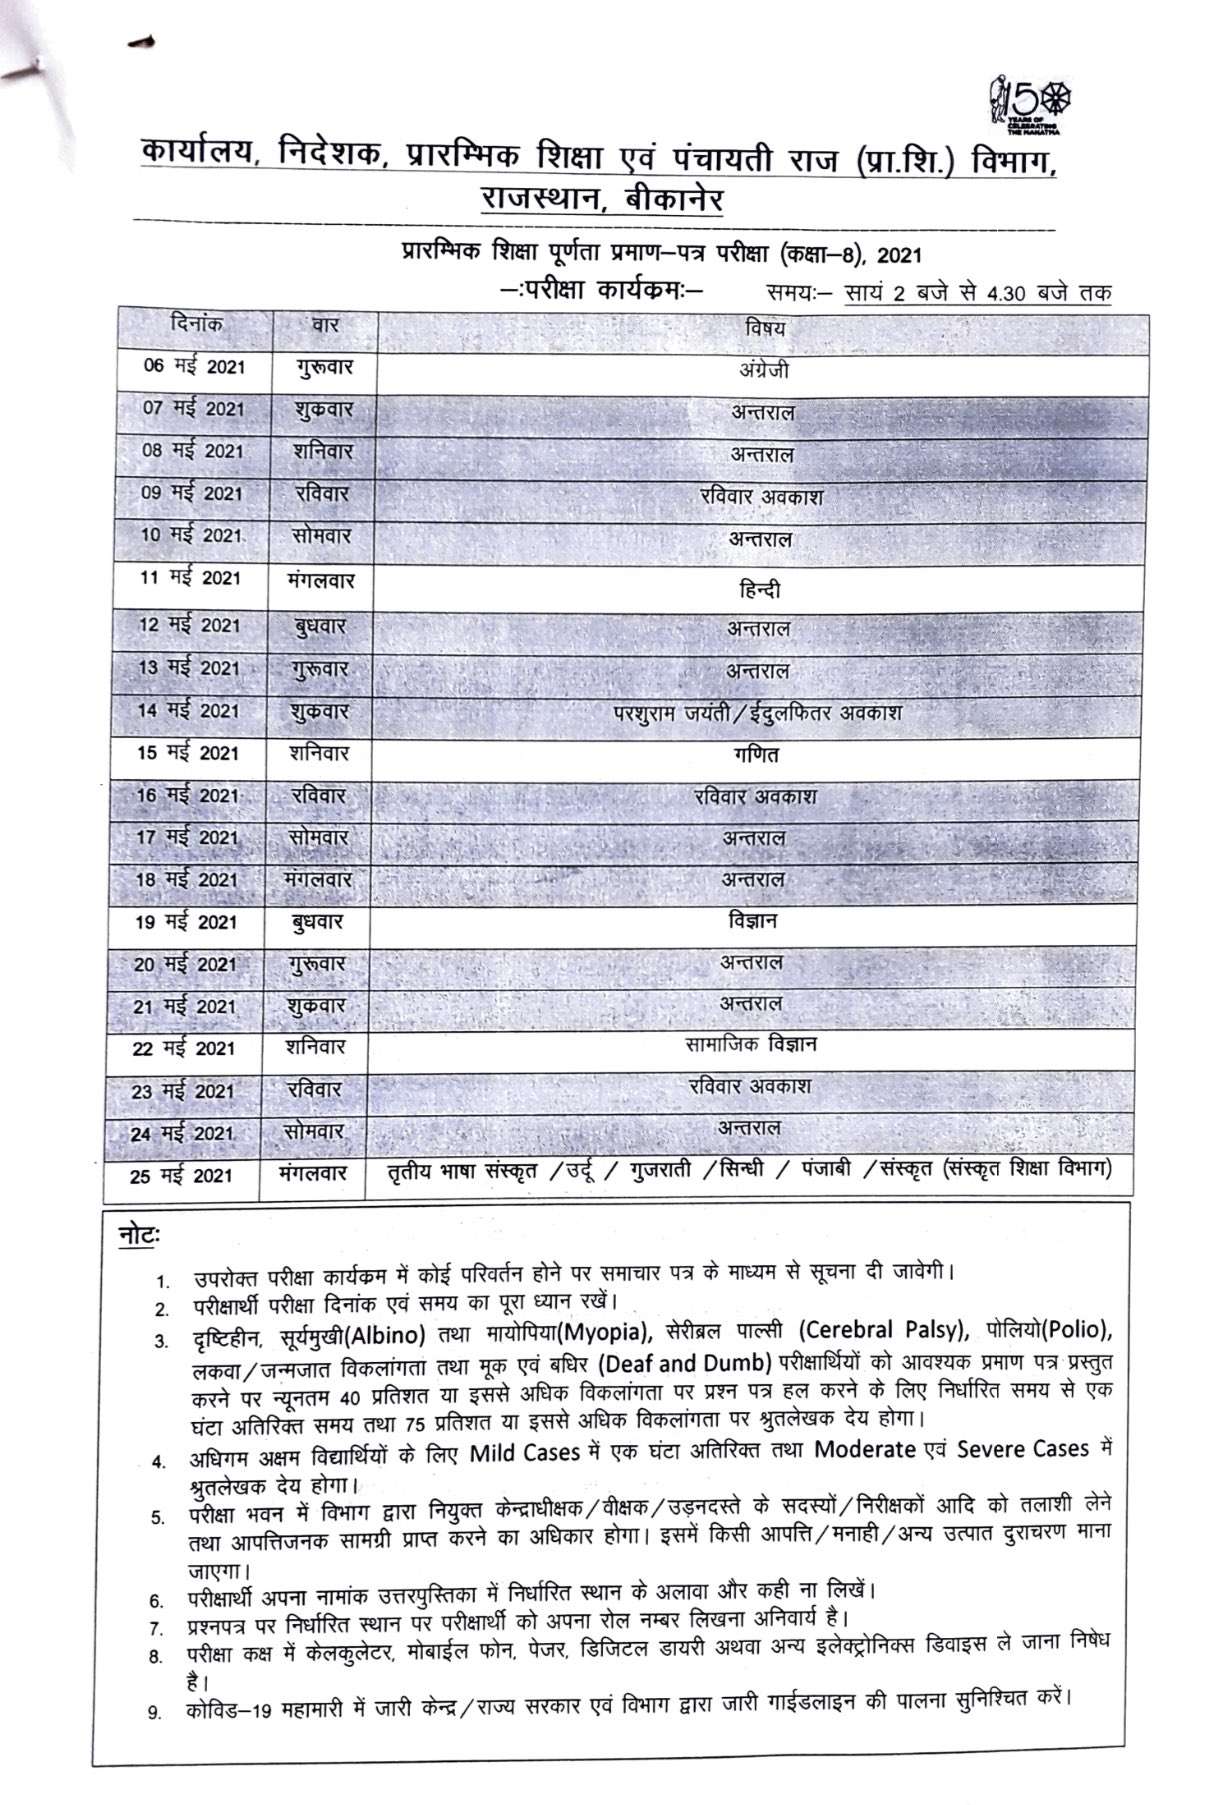 Rajasthan 8th board exam time table 2021